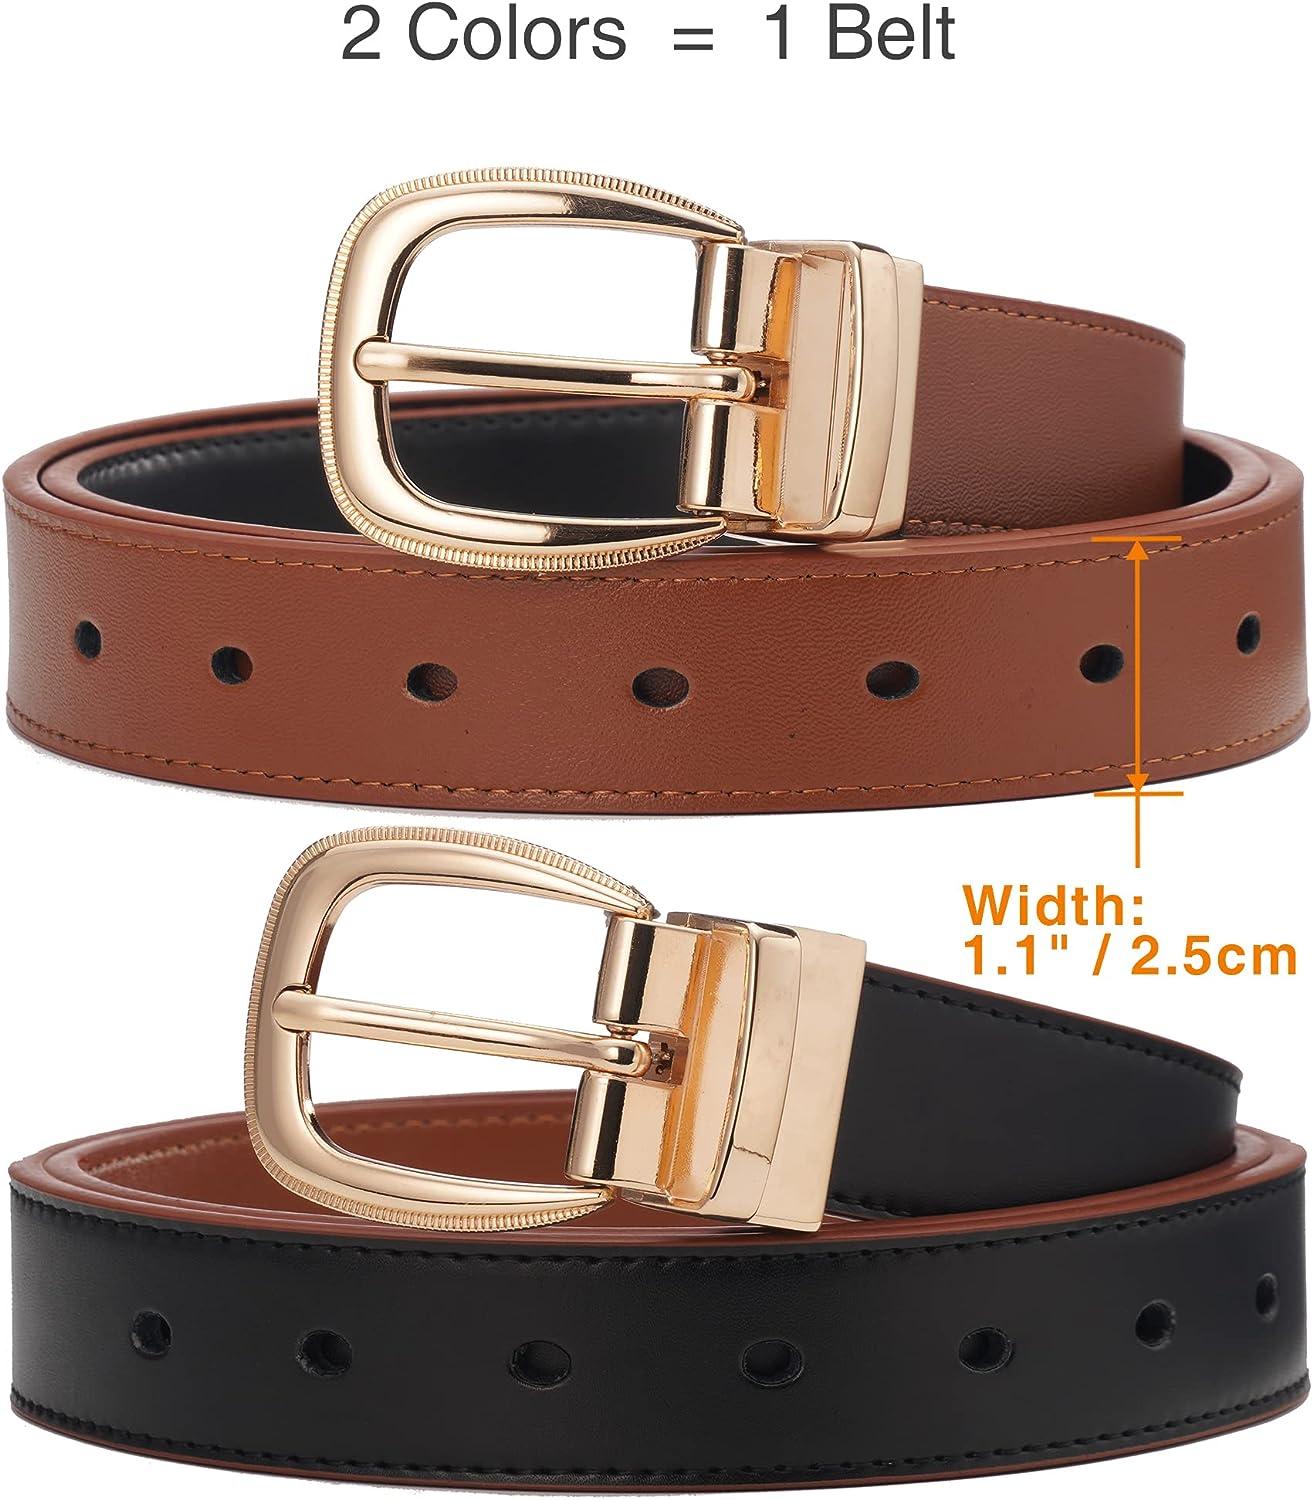 Womens Leather Belt, CR Reversible Belt for Women with Rotated Gold Buckle,  1.1 Width Casual Womens Belts for Jeans Pants Black+burnt Orange 35-37  (Fits Pants 12-14 )